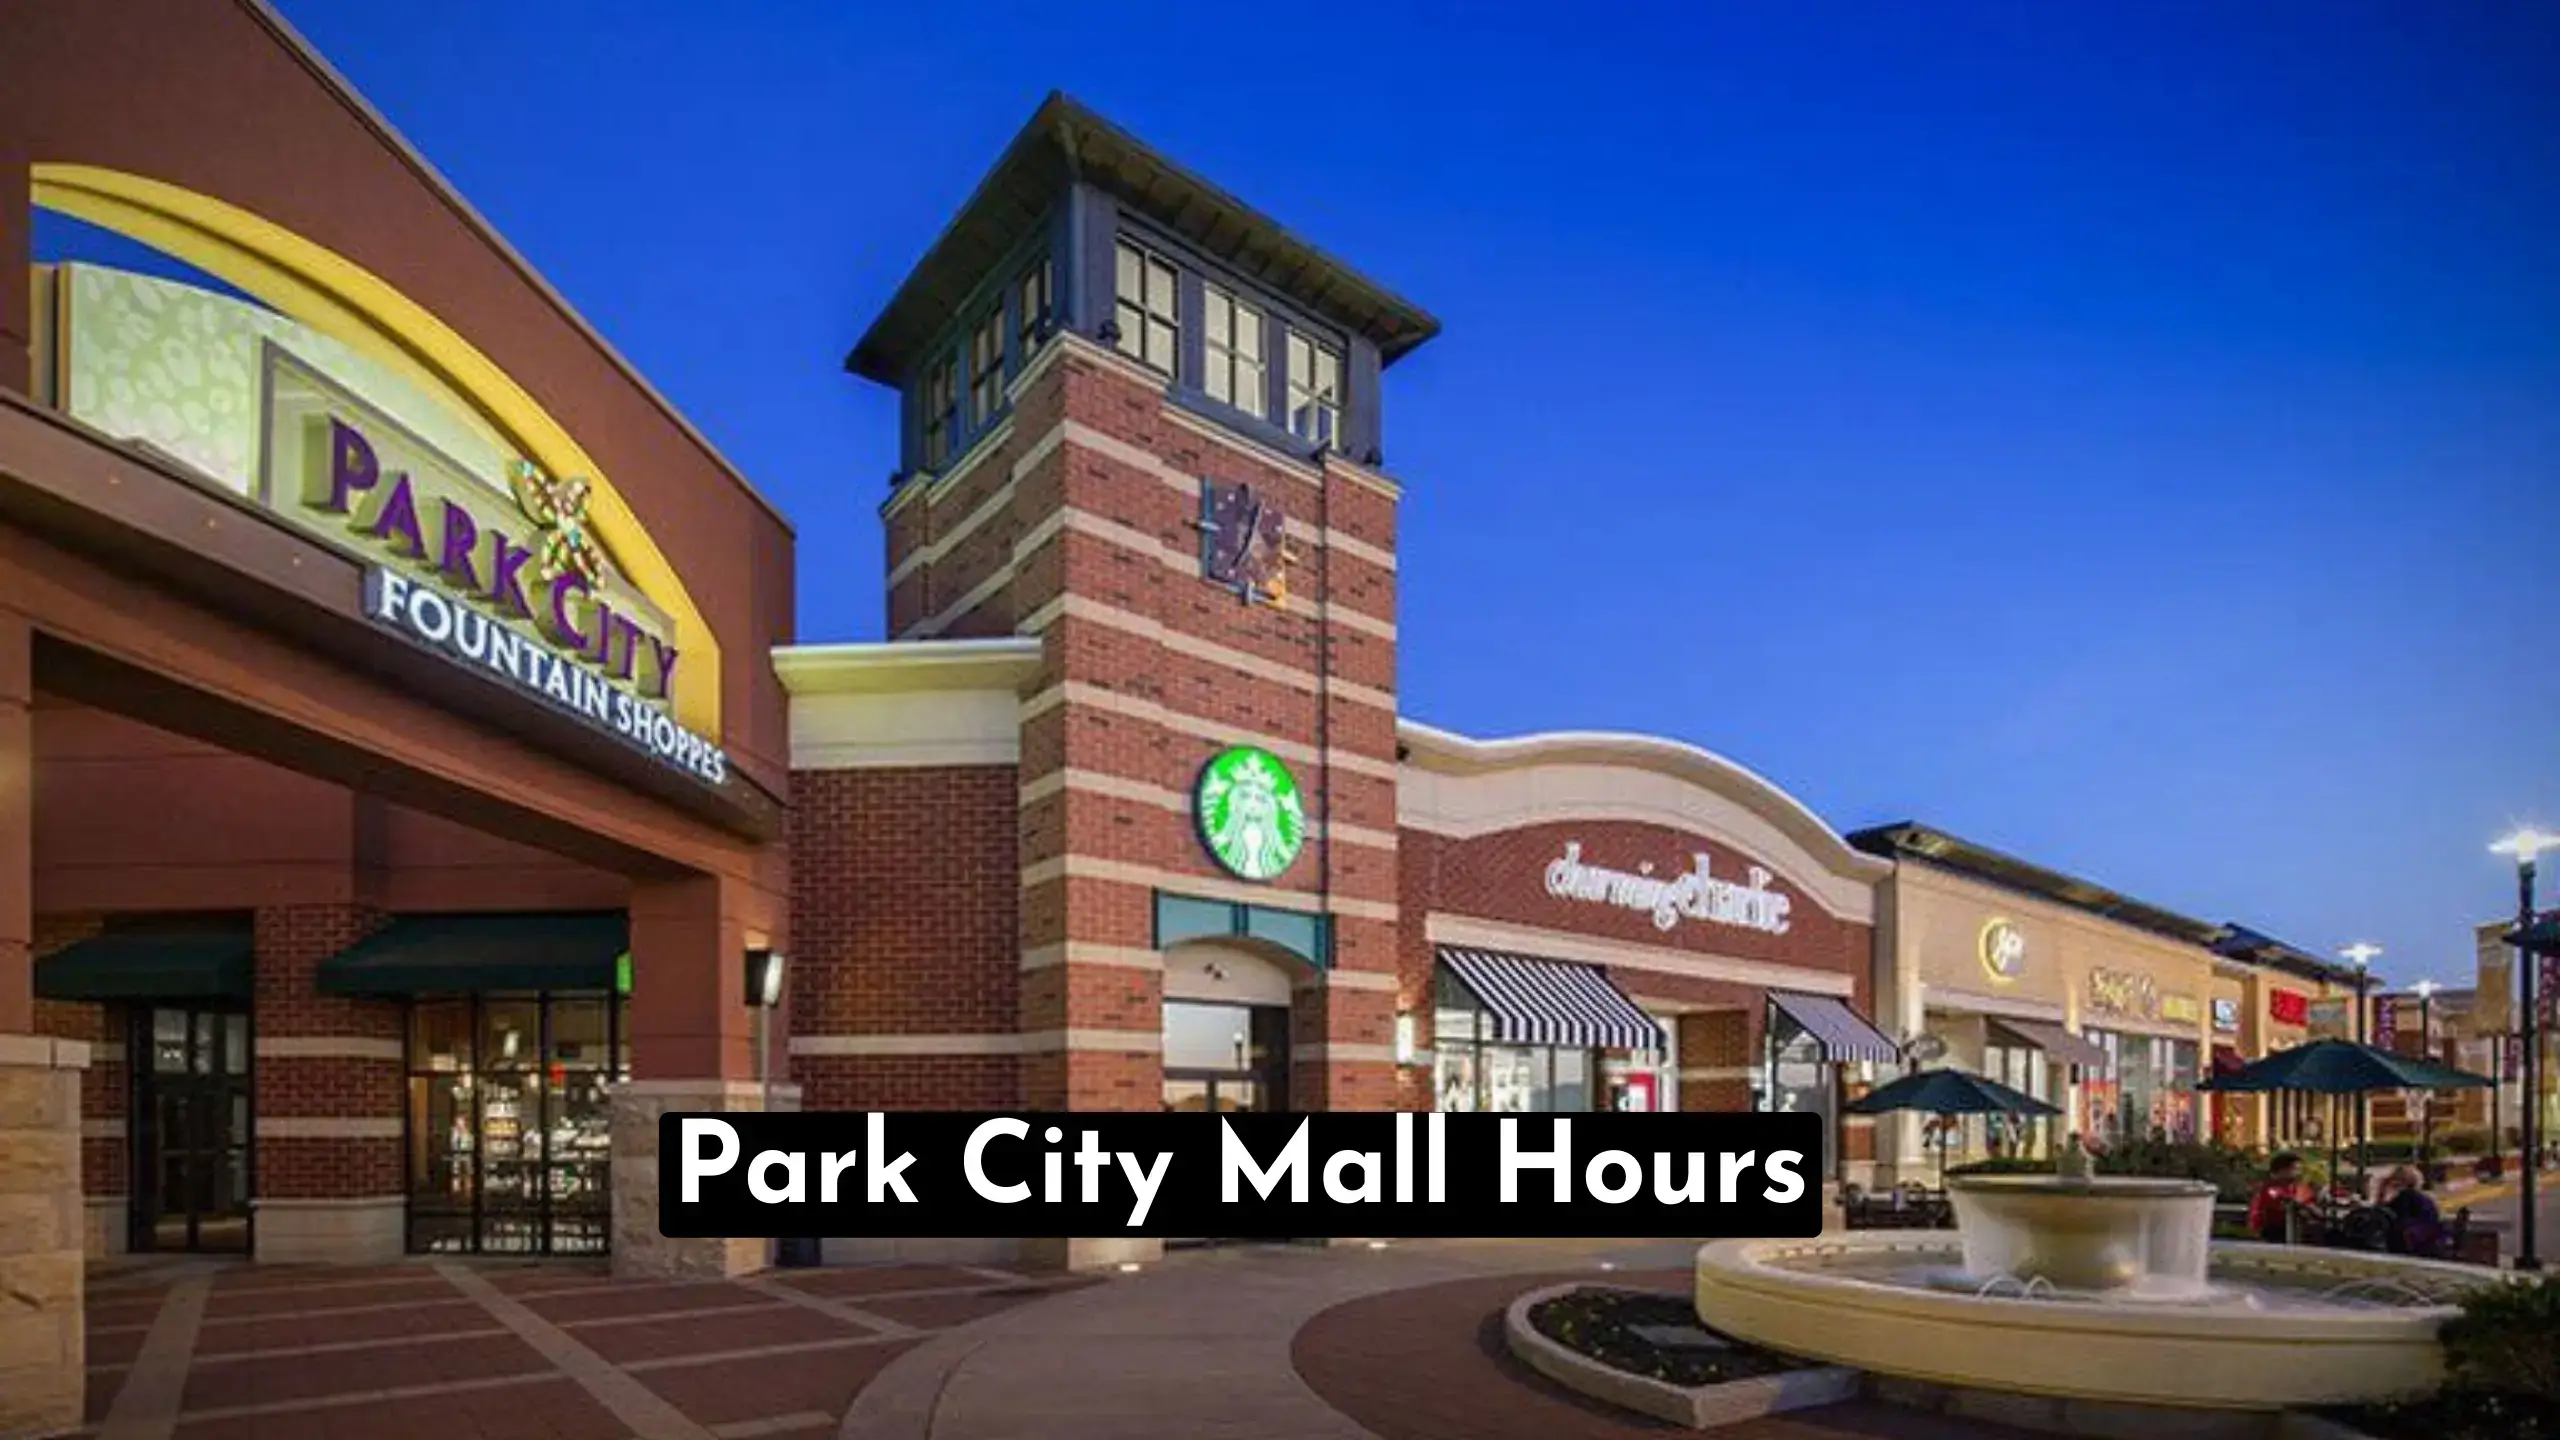 Discover The Park City Mall Hours And Plan Your Shopping Trip Accordingly | Read On To Know The Opening And Closing Times, Peak Hours & FAQs.